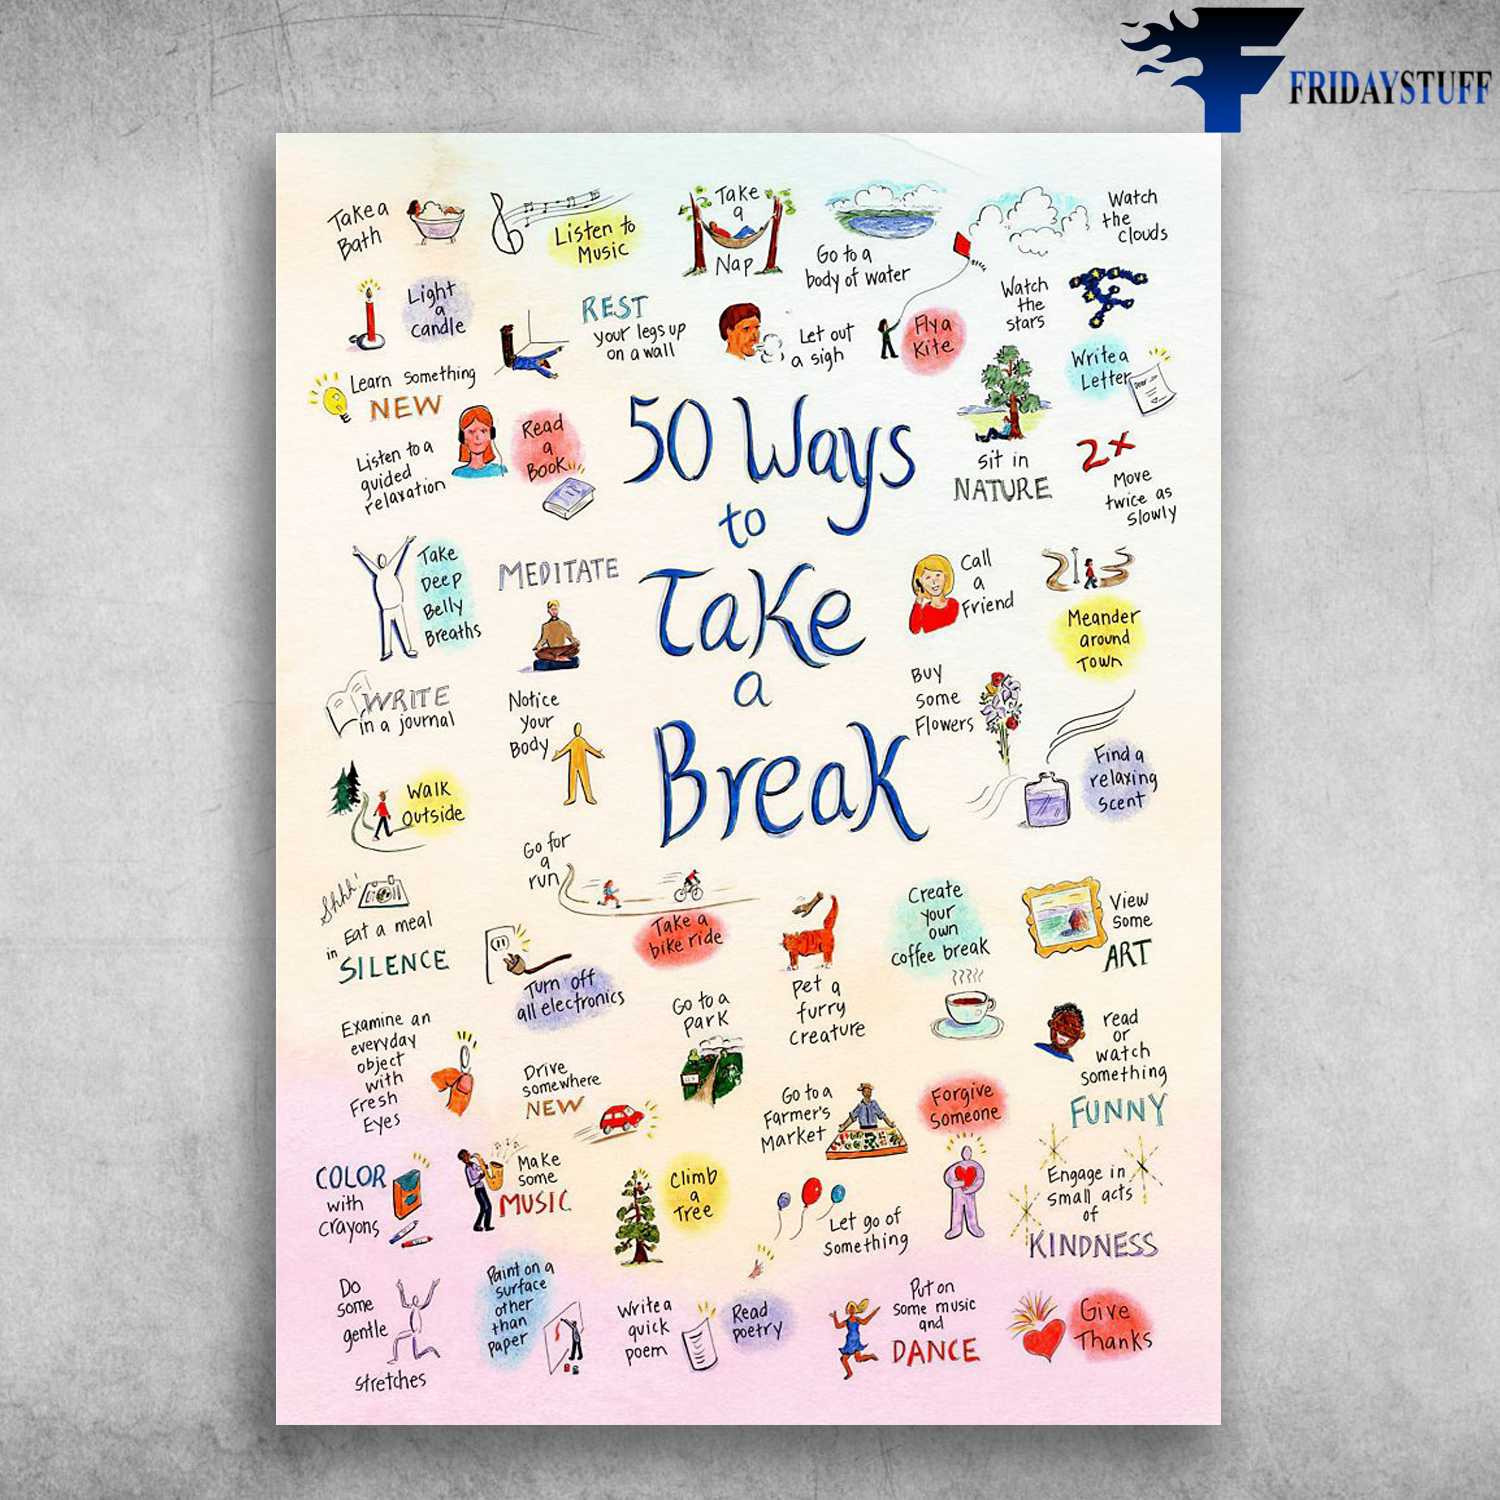 50 Ways To Take A Break - Take A Bath, Listen To Music, Go To A Body Of Water, Watcg The Stars, Watch The Clouds, Sit In Nature, Learn Something New